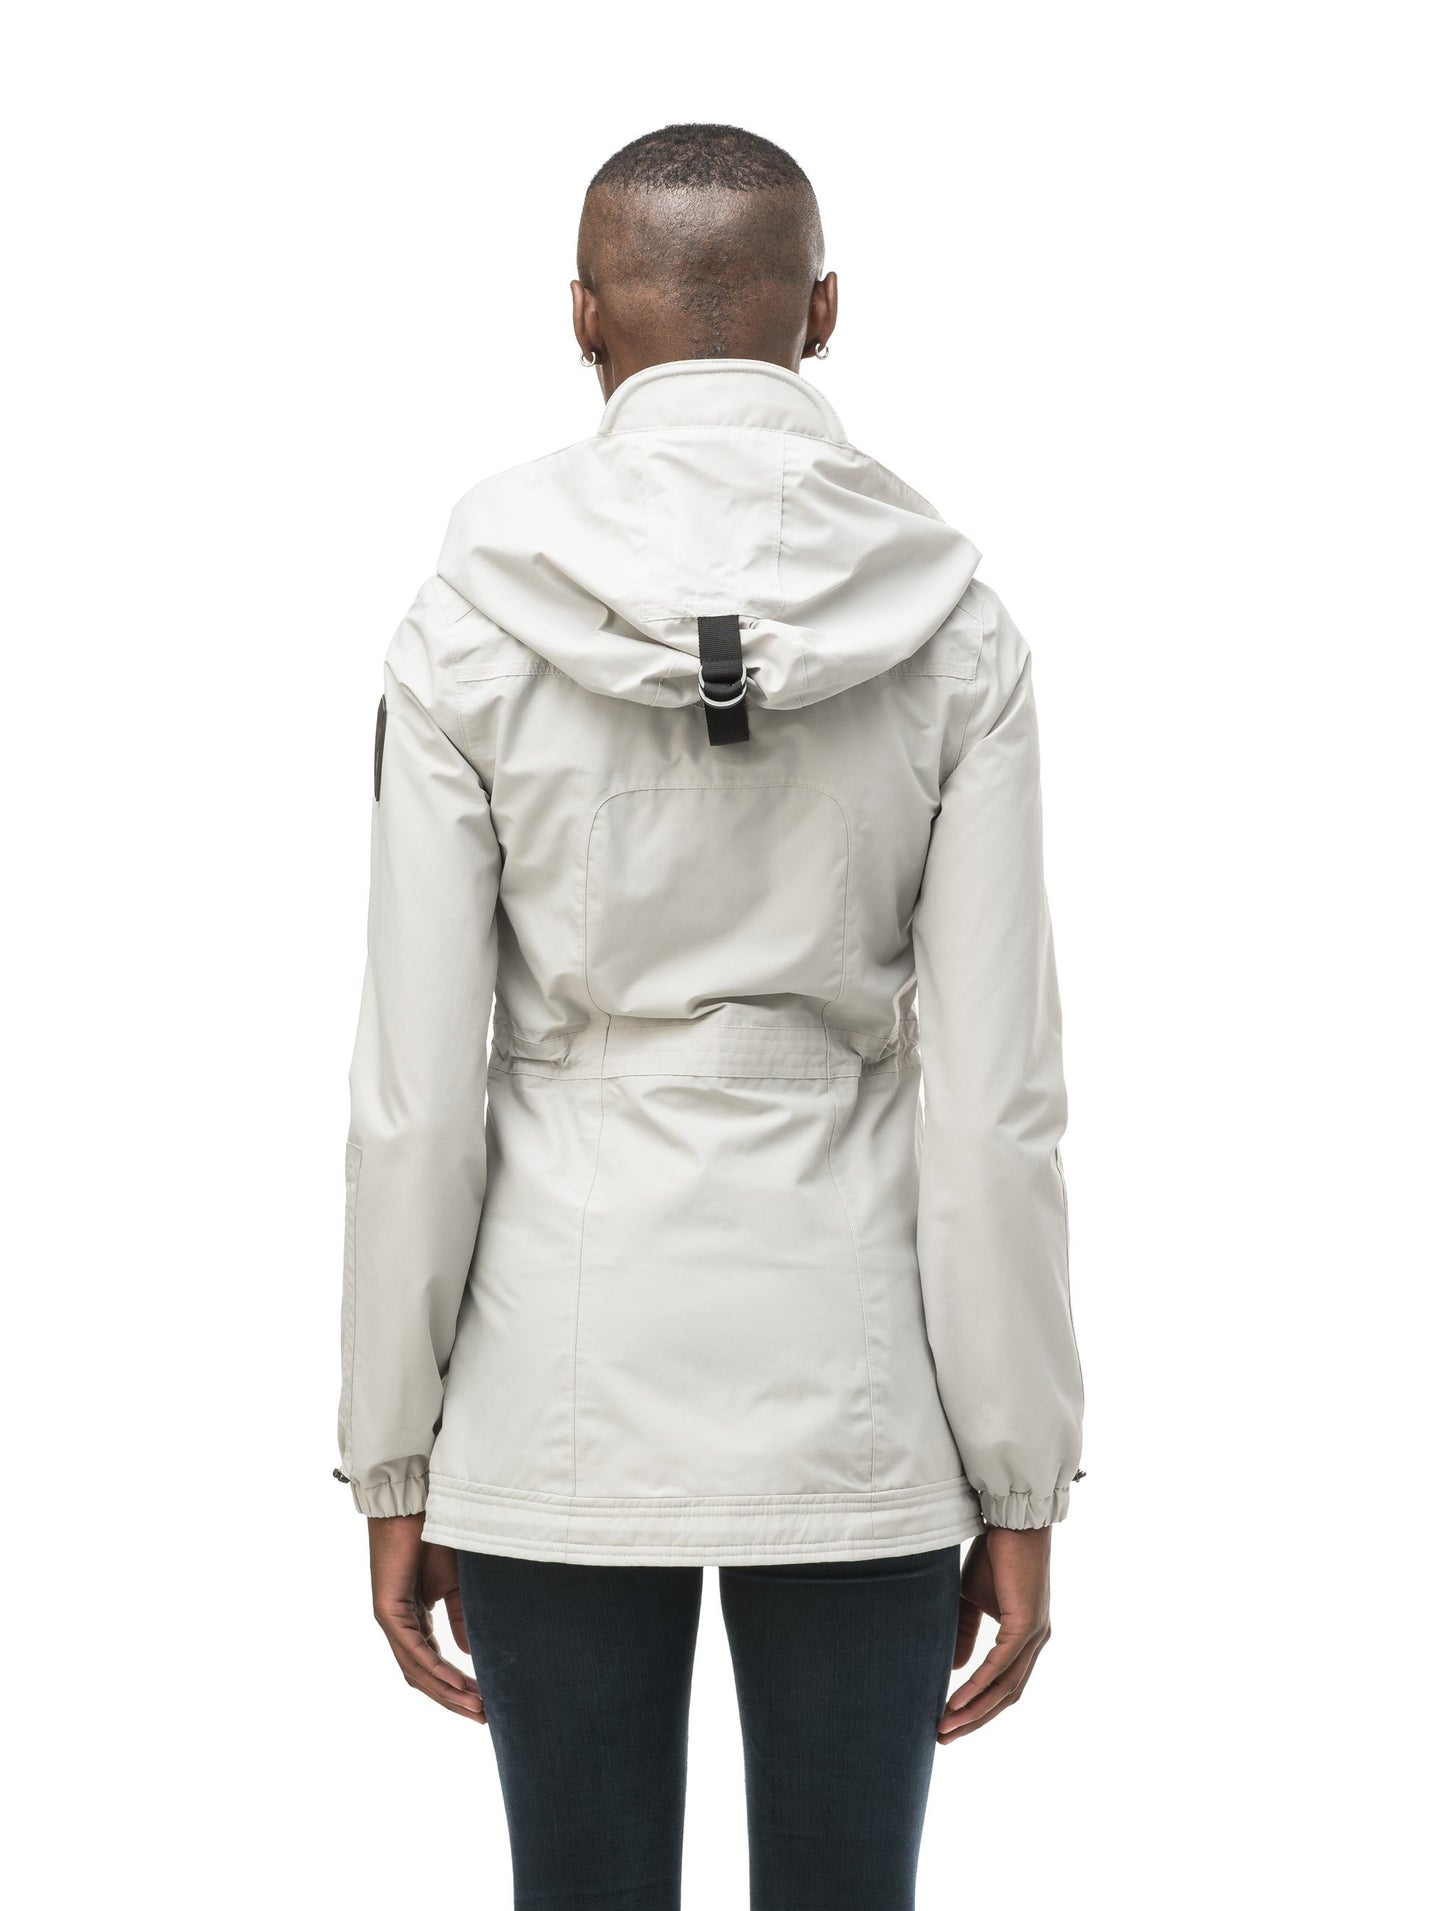 Women's hooded shirt jacket with four front pockets and adjustable waist in Light Grey